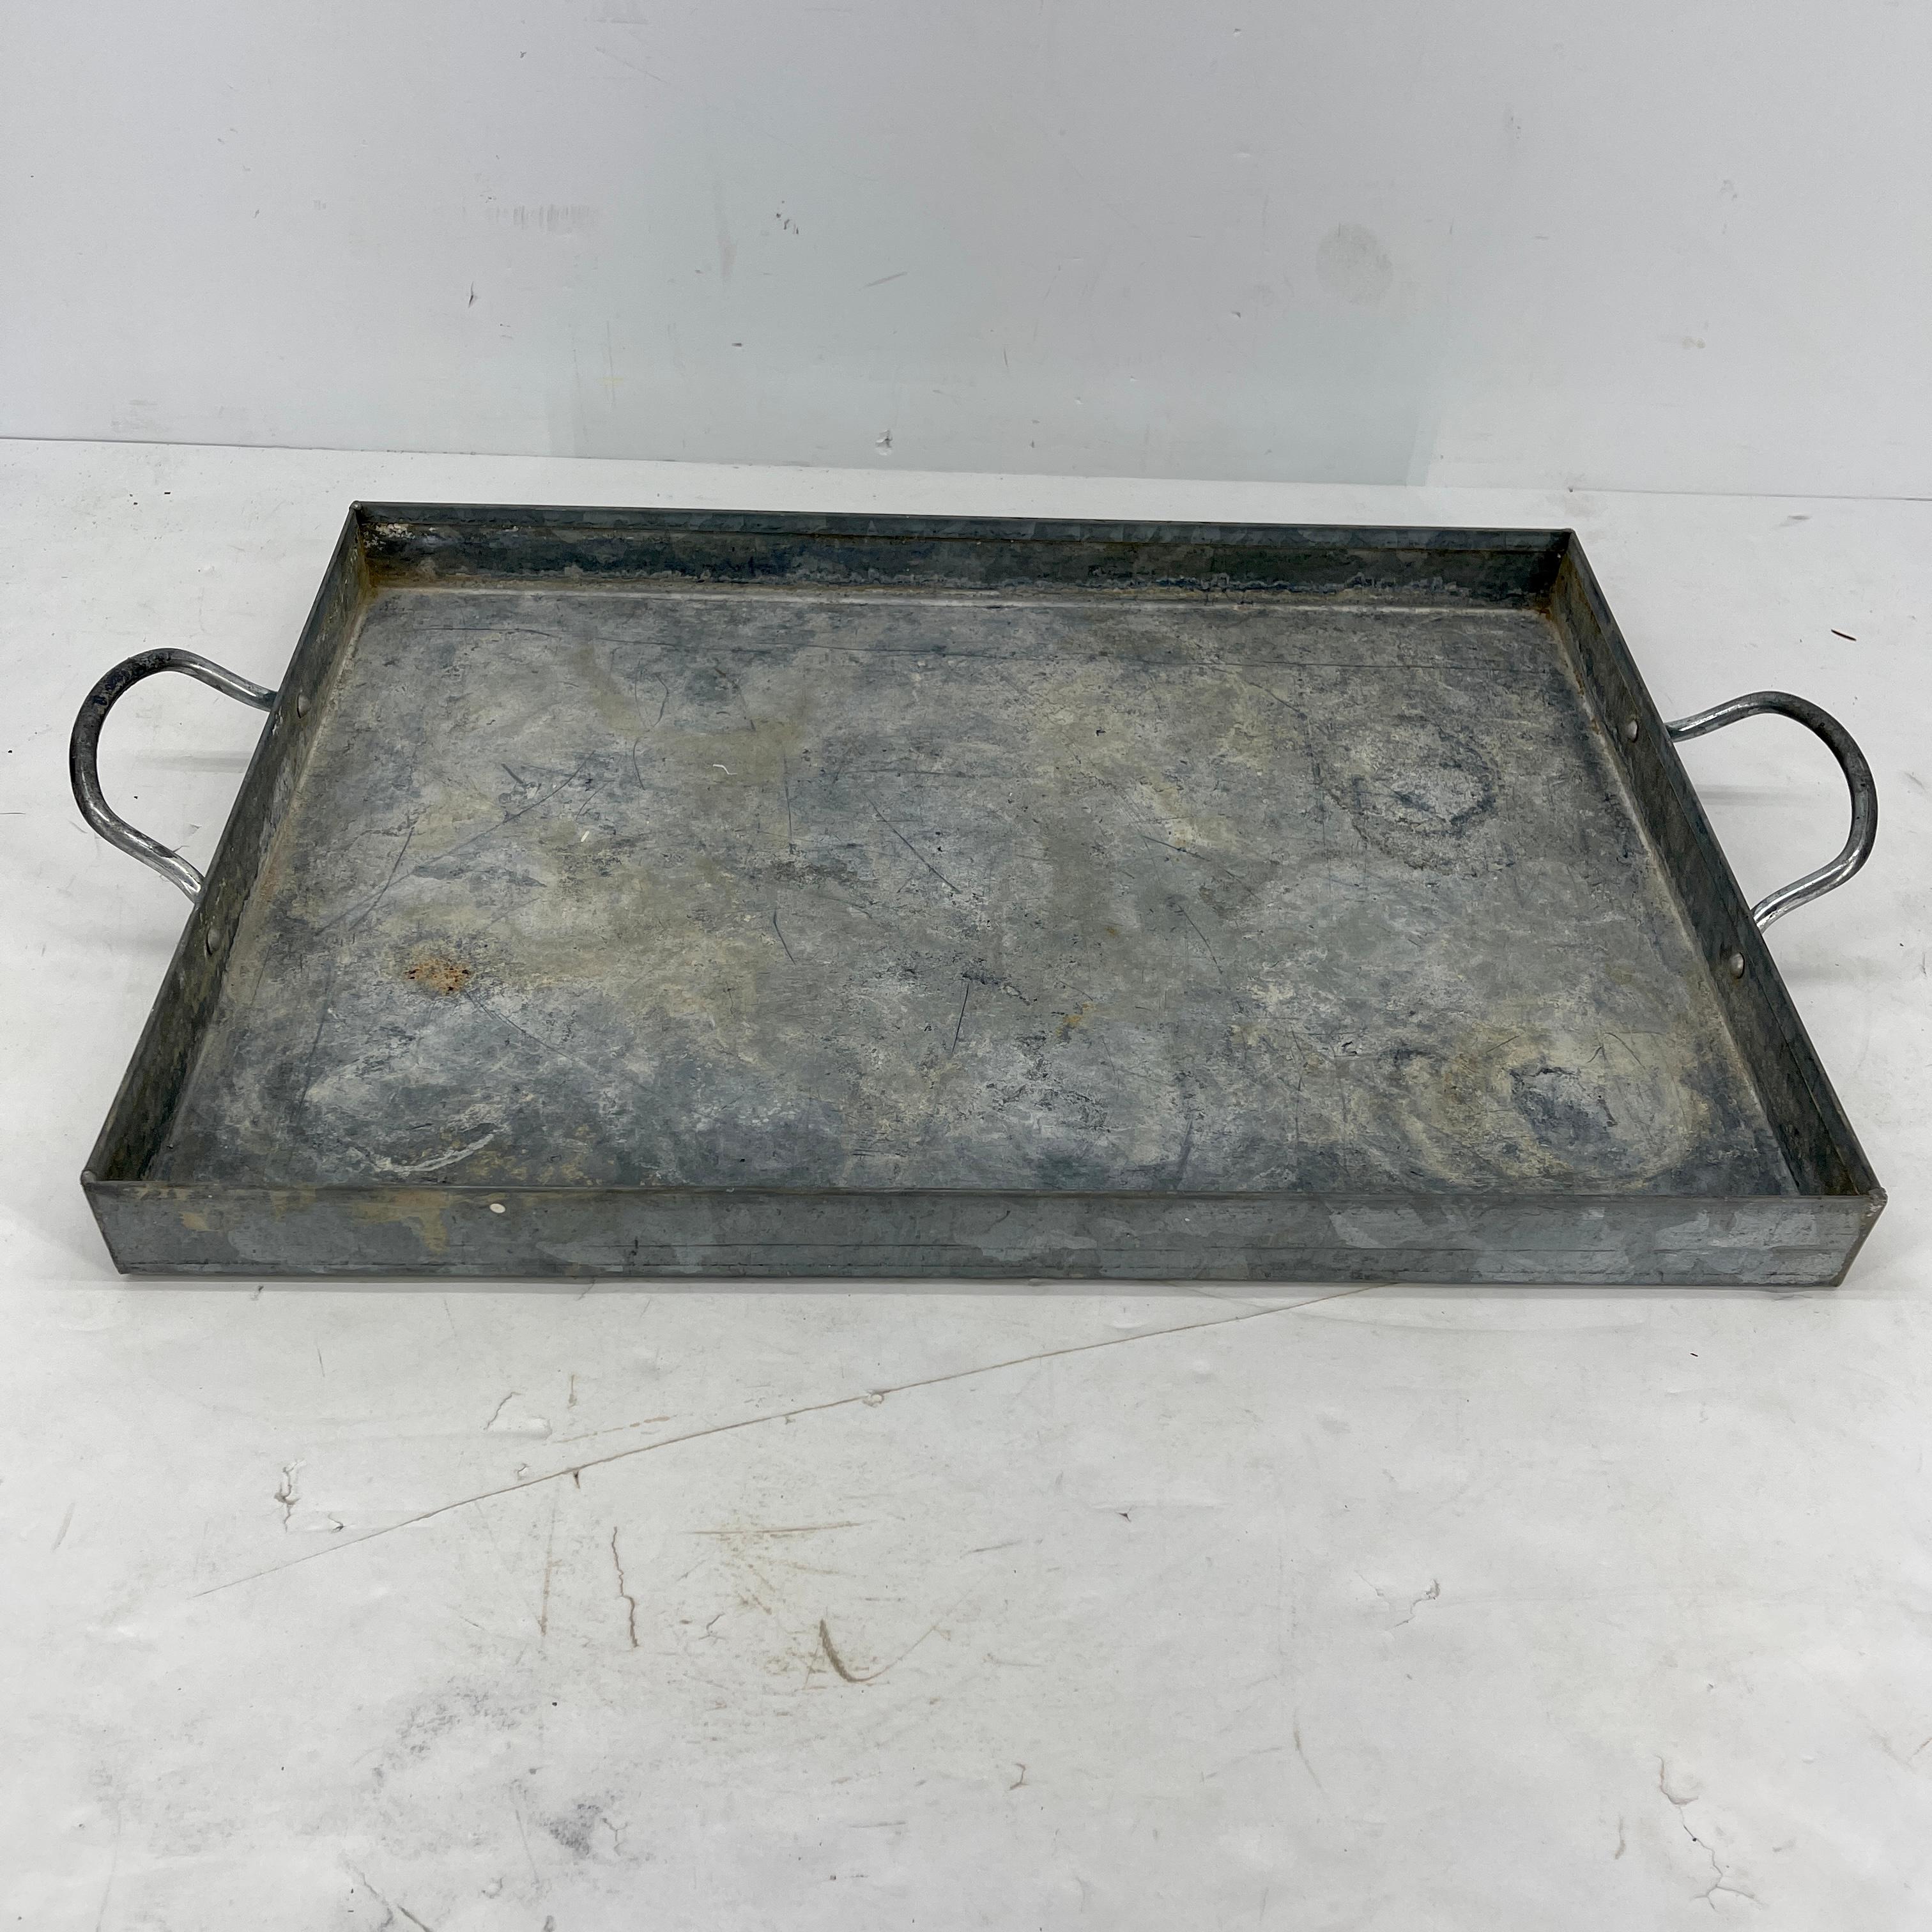 Mid-Century Modern galvanized metal serving bar tray with handles. This large tray is a perfect addition to a bar or as a serving piece for all entertaining needs. The tray is sturdy. The tray is as functional as it is timeless in industrial, boho